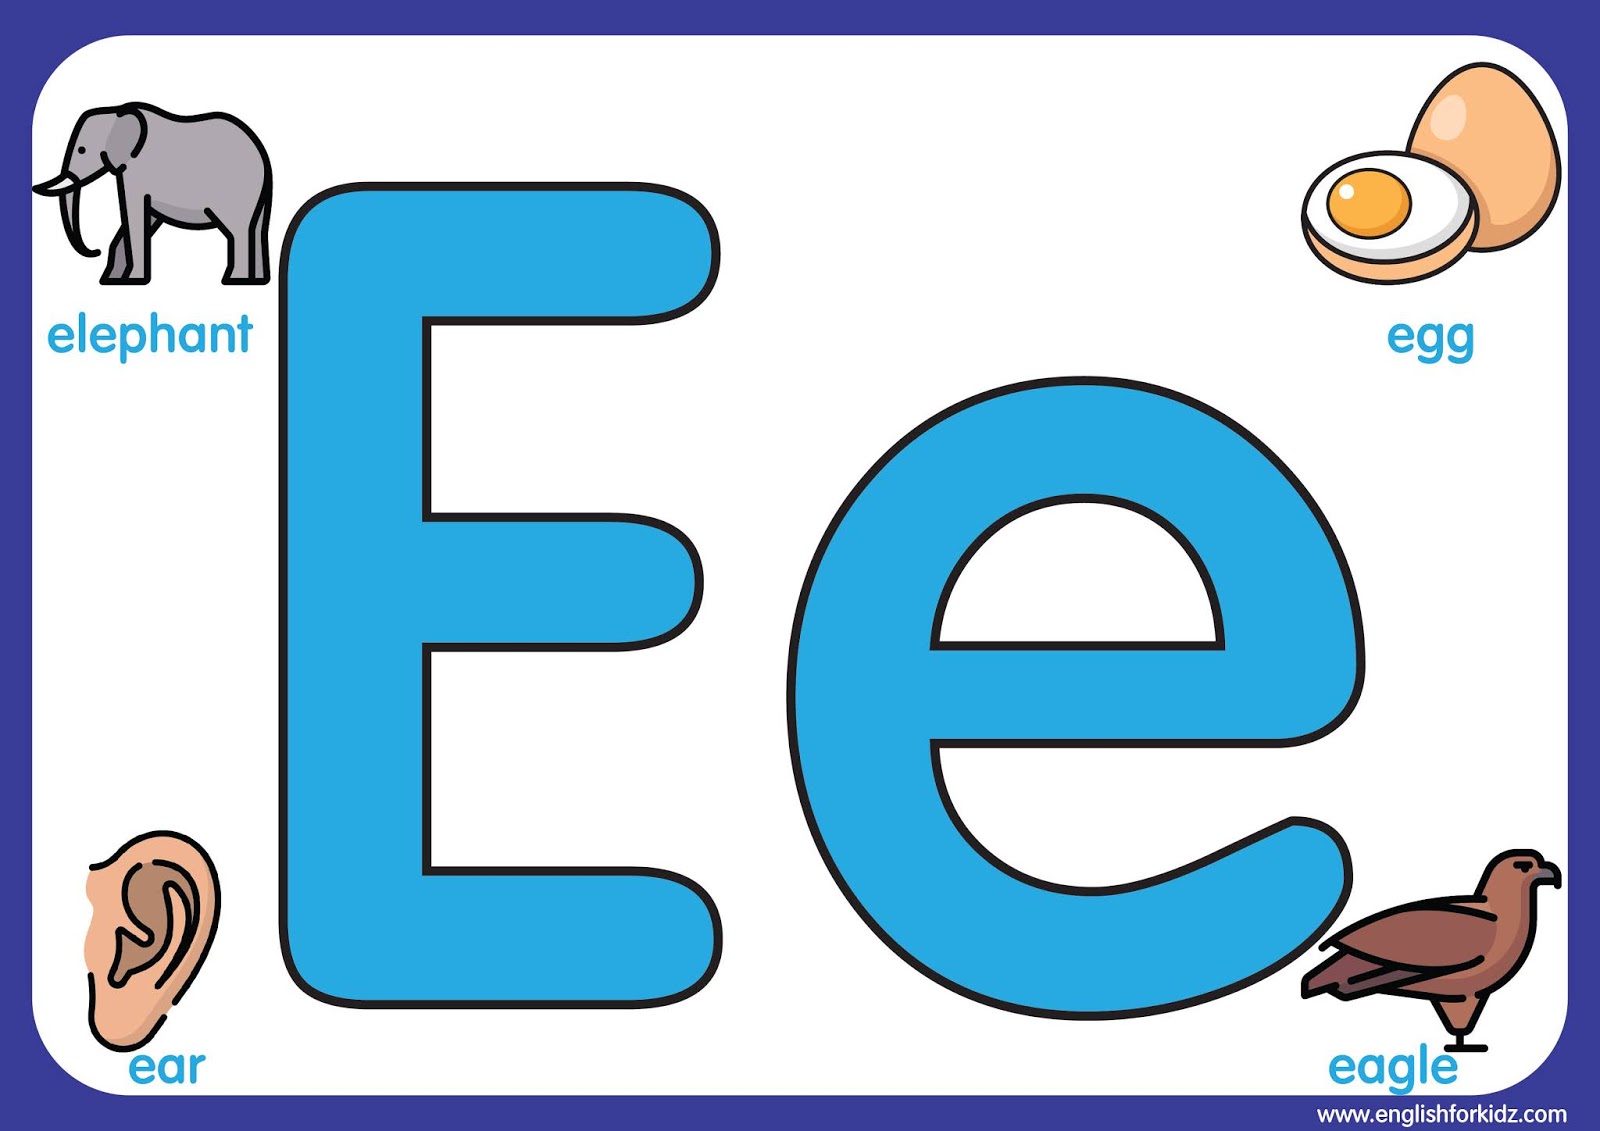 English for Kids Step by Step: Letter E Worksheets, Flash Cards